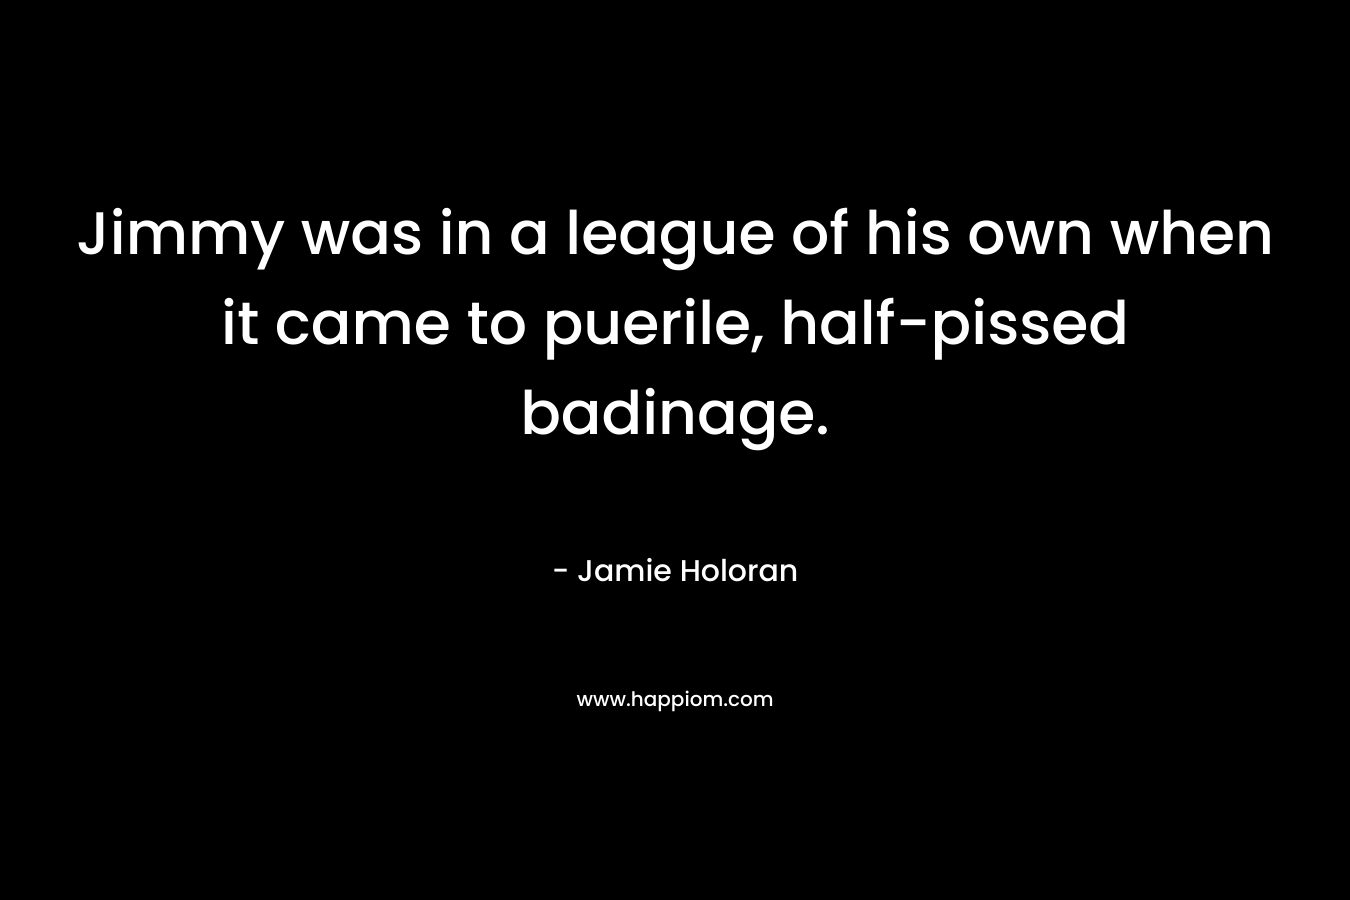 Jimmy was in a league of his own when it came to puerile, half-pissed badinage. – Jamie Holoran